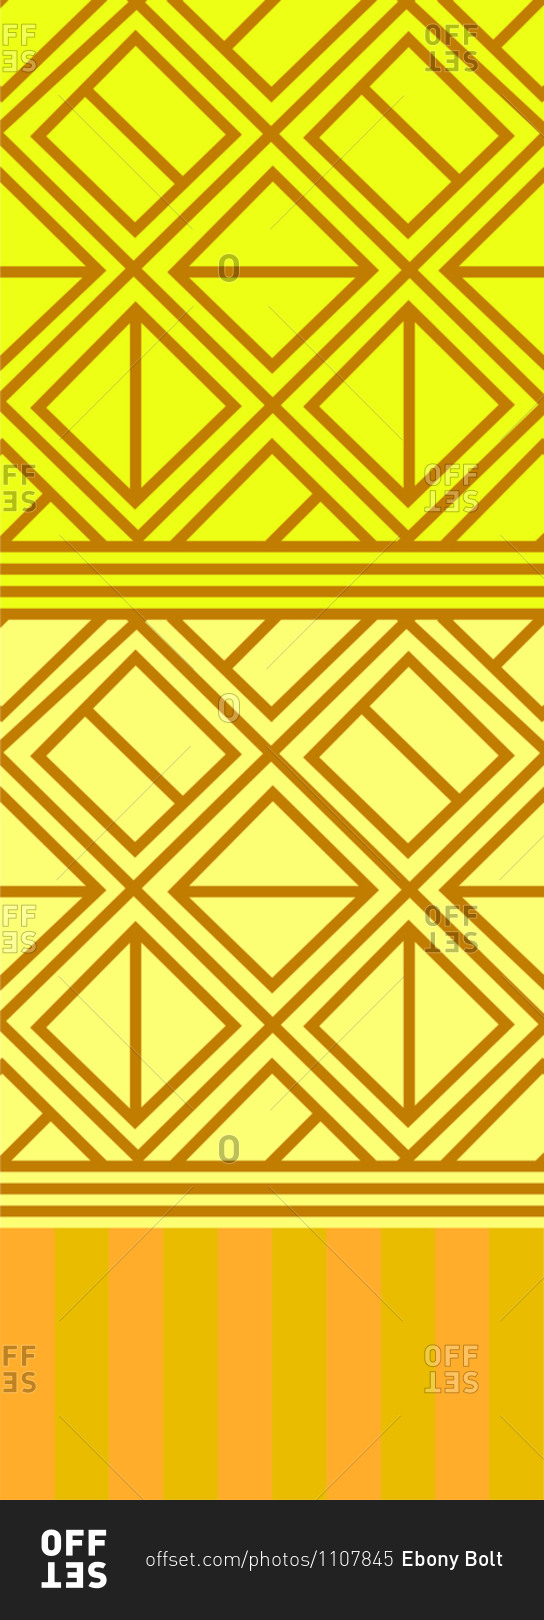 Vertical digital illustration of abstract geometric shapes\
and lines on a yellow colored background stock photo -\
OFFSET